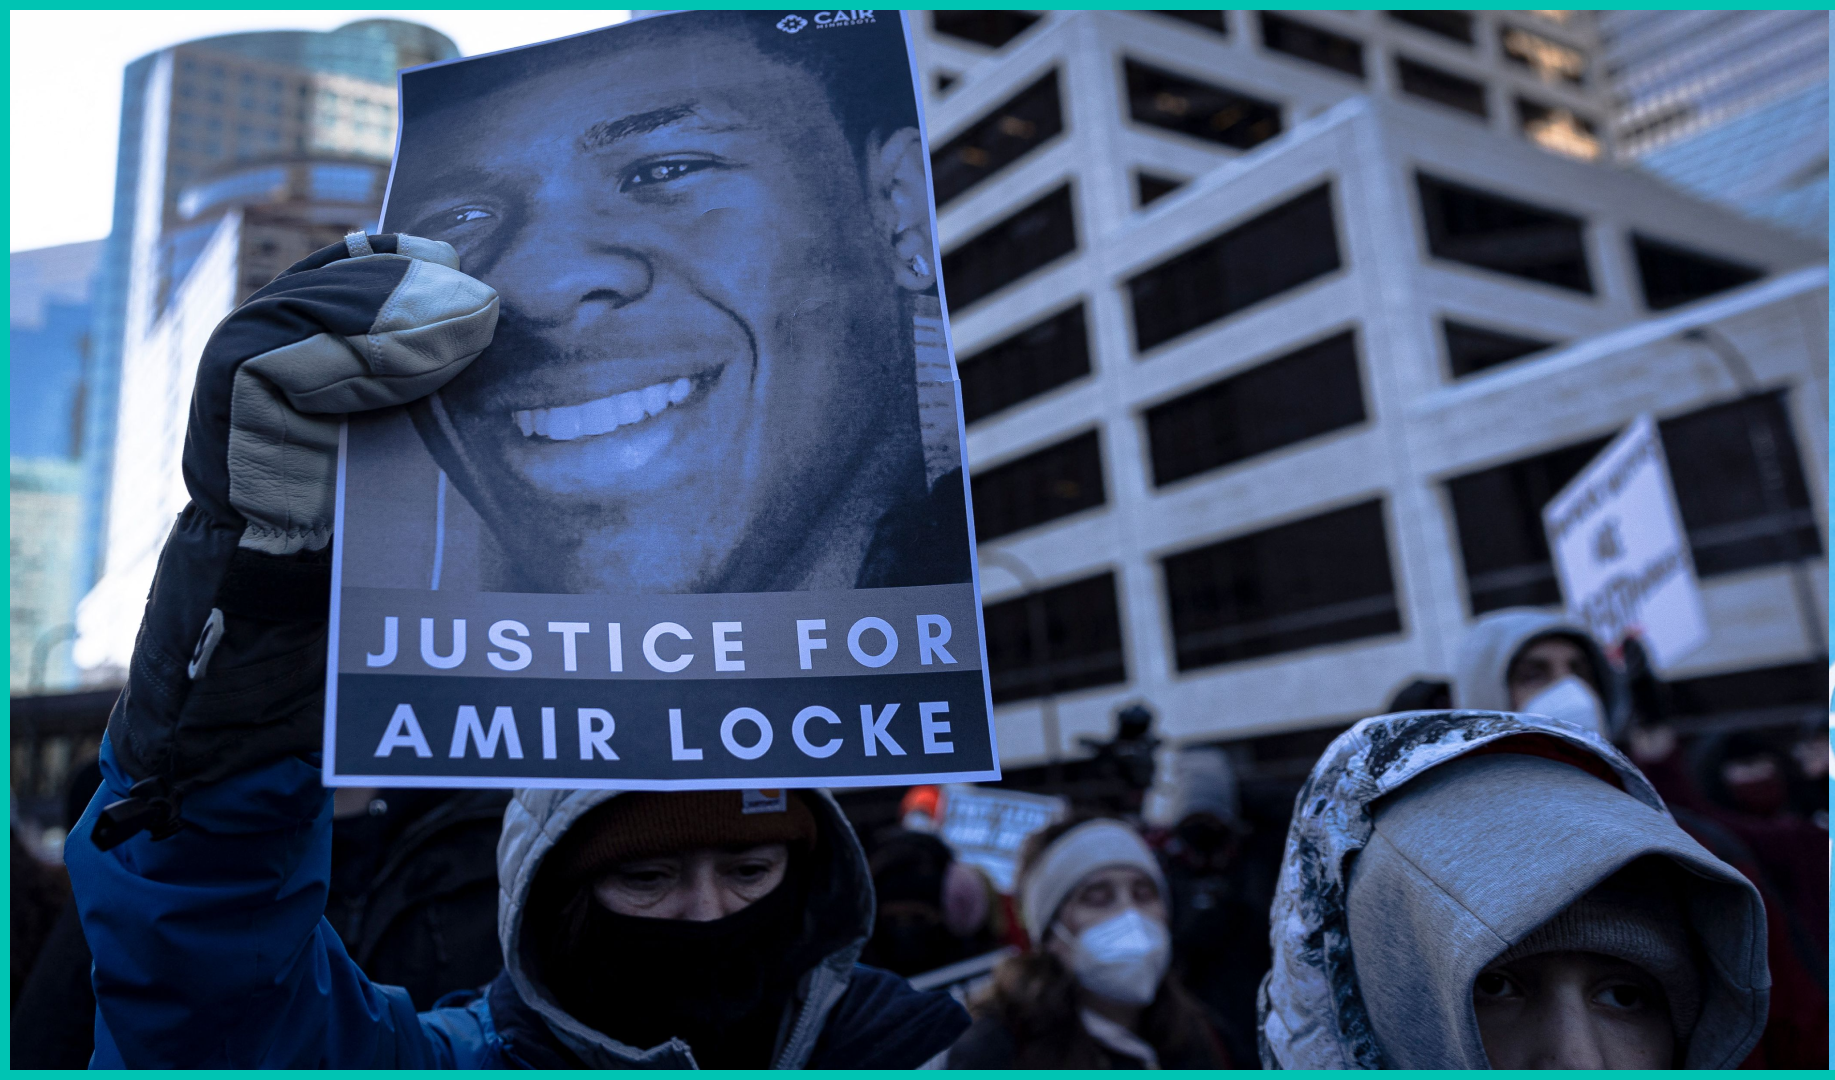 A demonstrator holds a photo of Amir Locke during a rally in protest of his killing